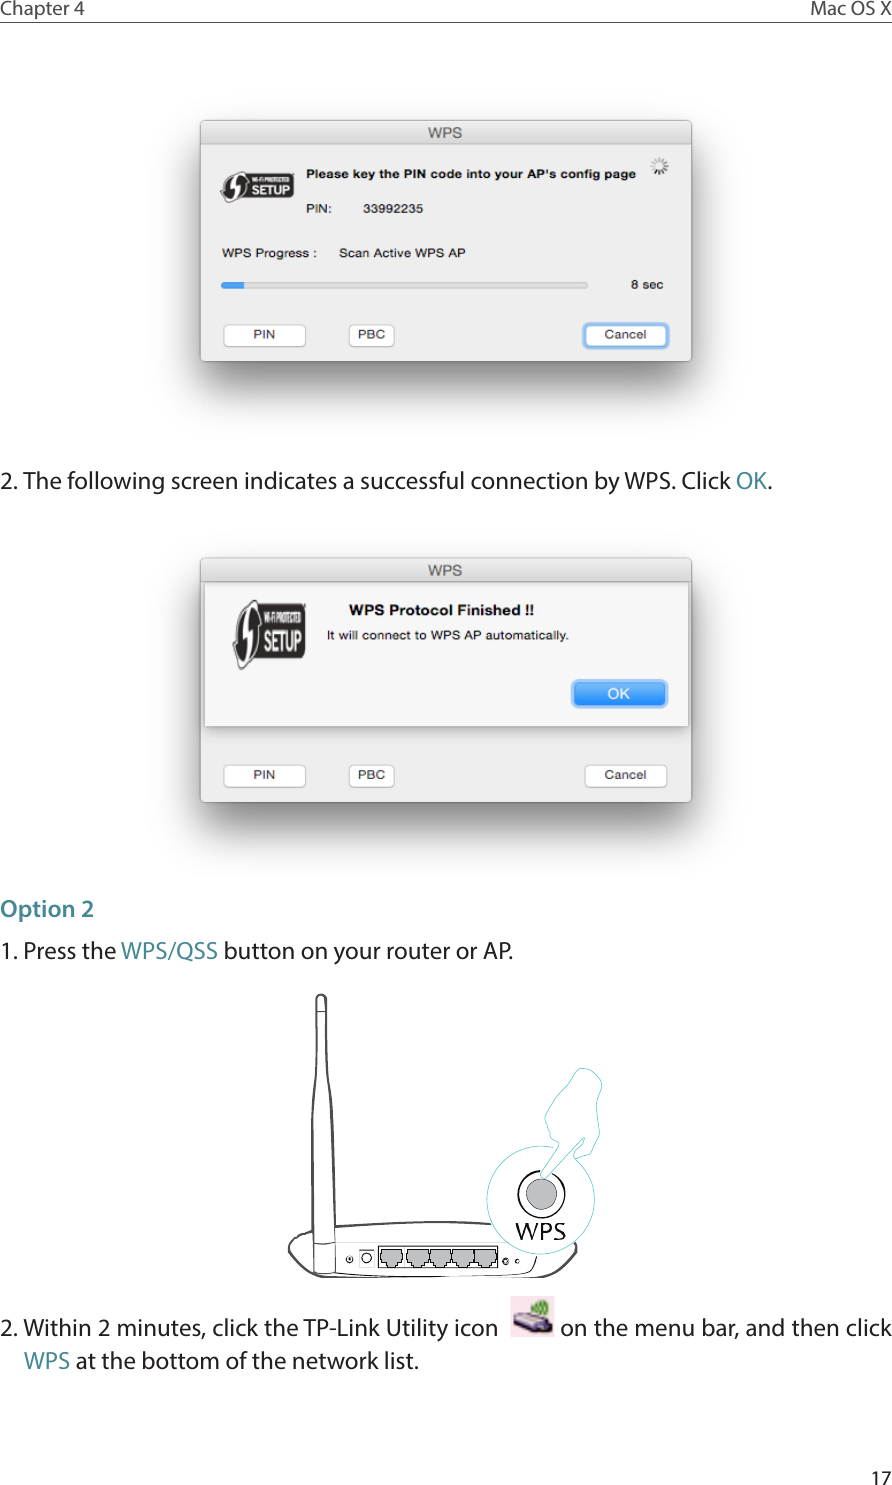 17Chapter 4 Mac OS X2. The following screen indicates a successful connection by WPS. Click OK.Option 21. Press the WPS/QSS button on your router or AP.2. Within 2 minutes, click the TP-Link Utility icon    on the menu bar, and then click WPS at the bottom of the network list.